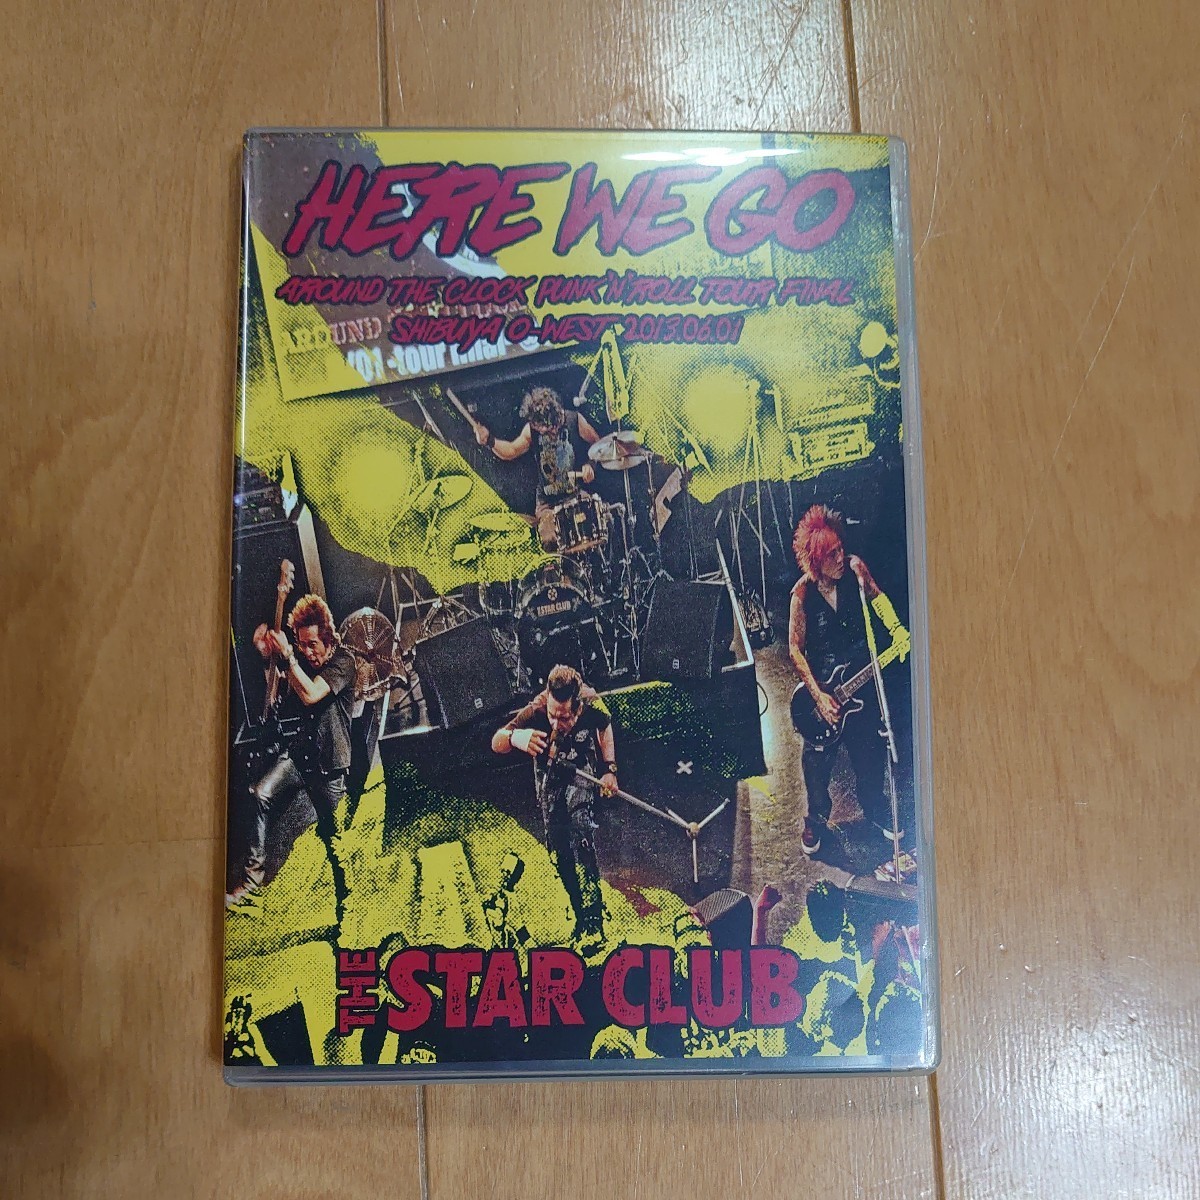 THE STAR CLUB DVD 「HERE WE GO AROUND THE CLOCK PUNK’N’ROLL TOUR FINAL 」　スタークラブ　HIKAGE COBRA SA